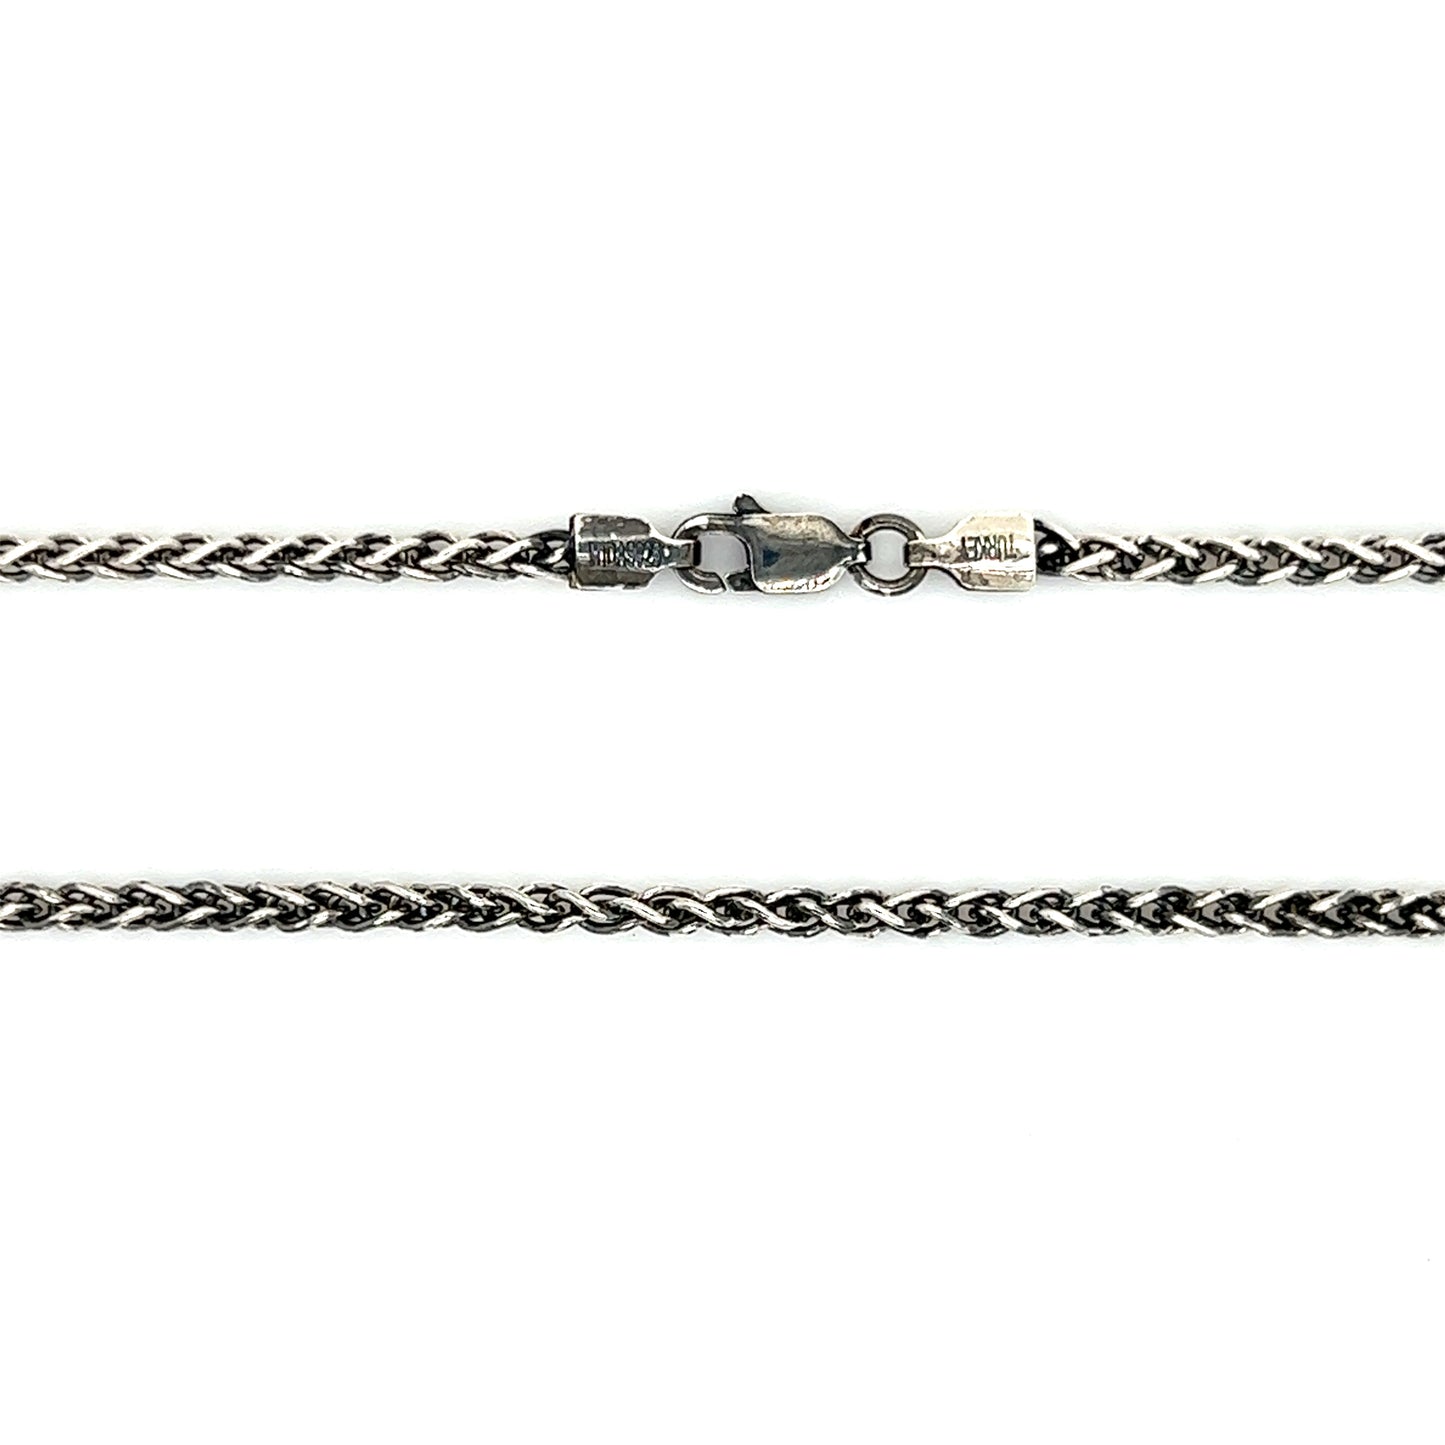 Oxidized Wheat 2.25mm Chain with 20in of Length in Sterling Silver Chain and Clasp View